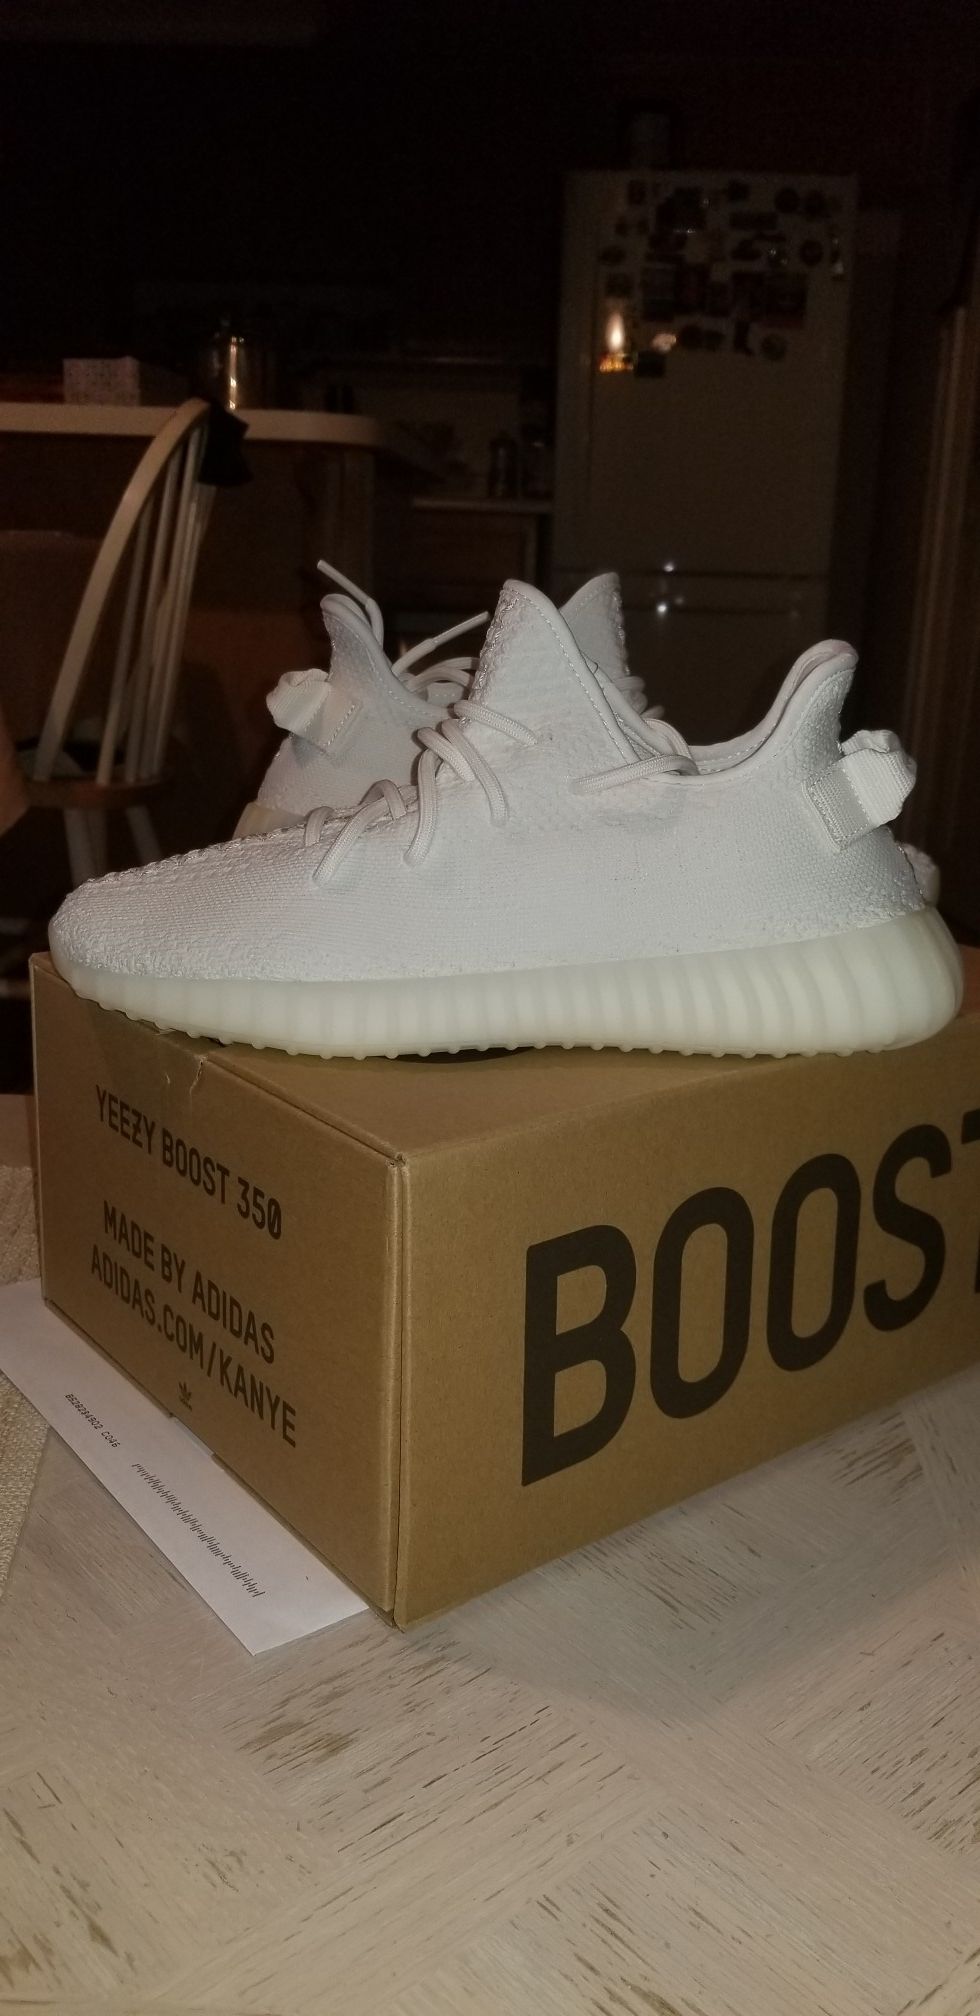 Adidas Yeezy bost 350 V2 Triple white, brand new with box, men's size 8 (womens 9.5)